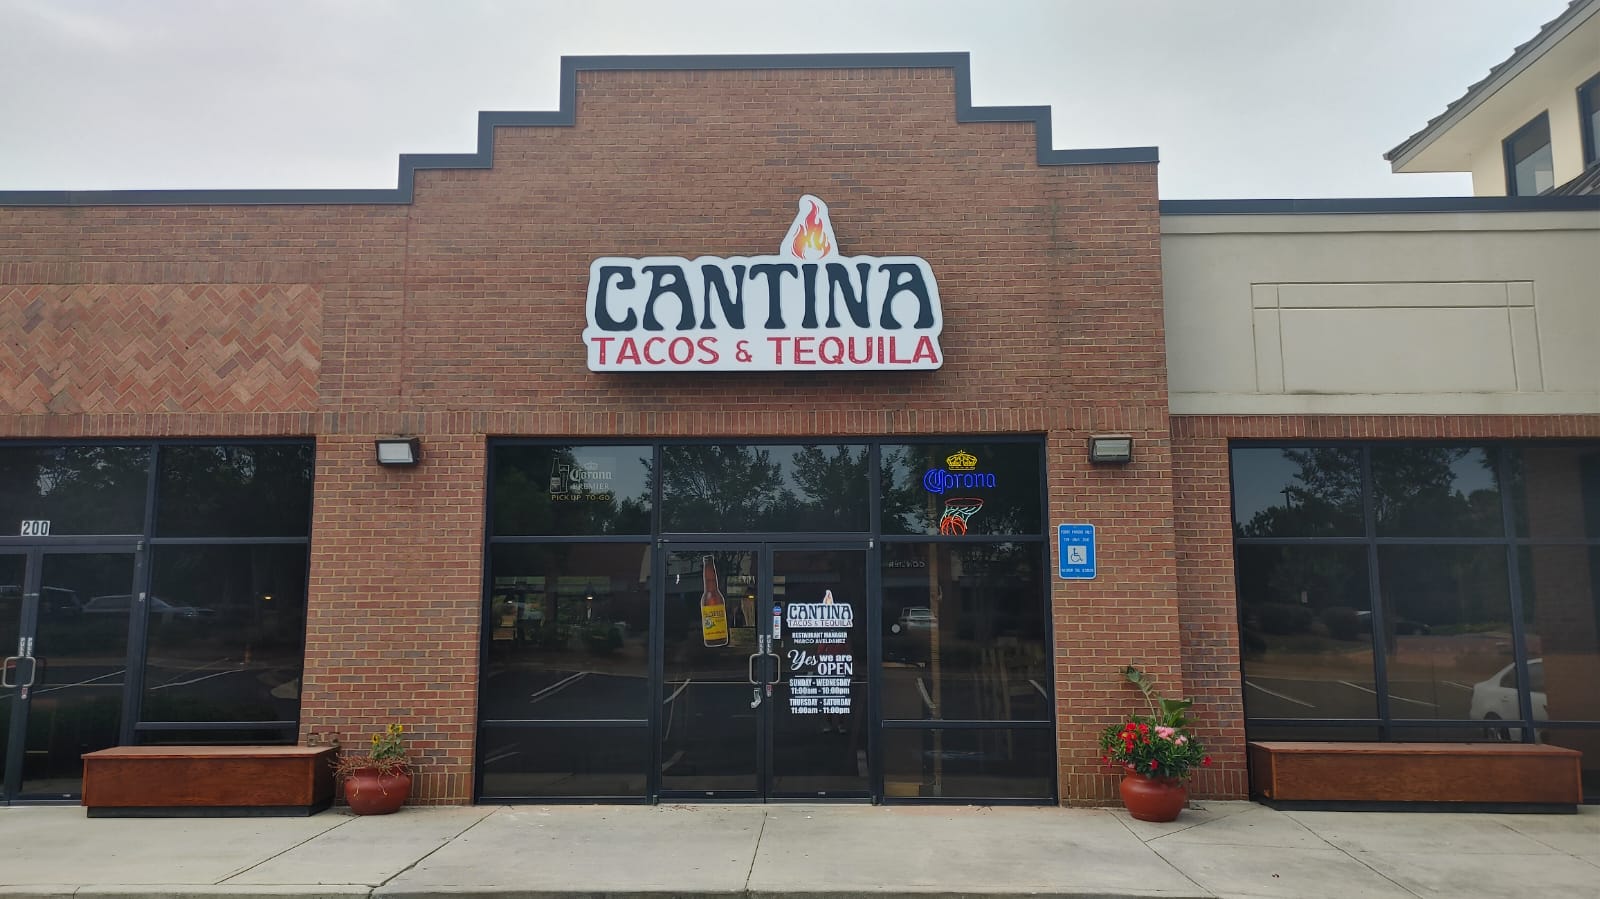 Cantina tacos & tequilas